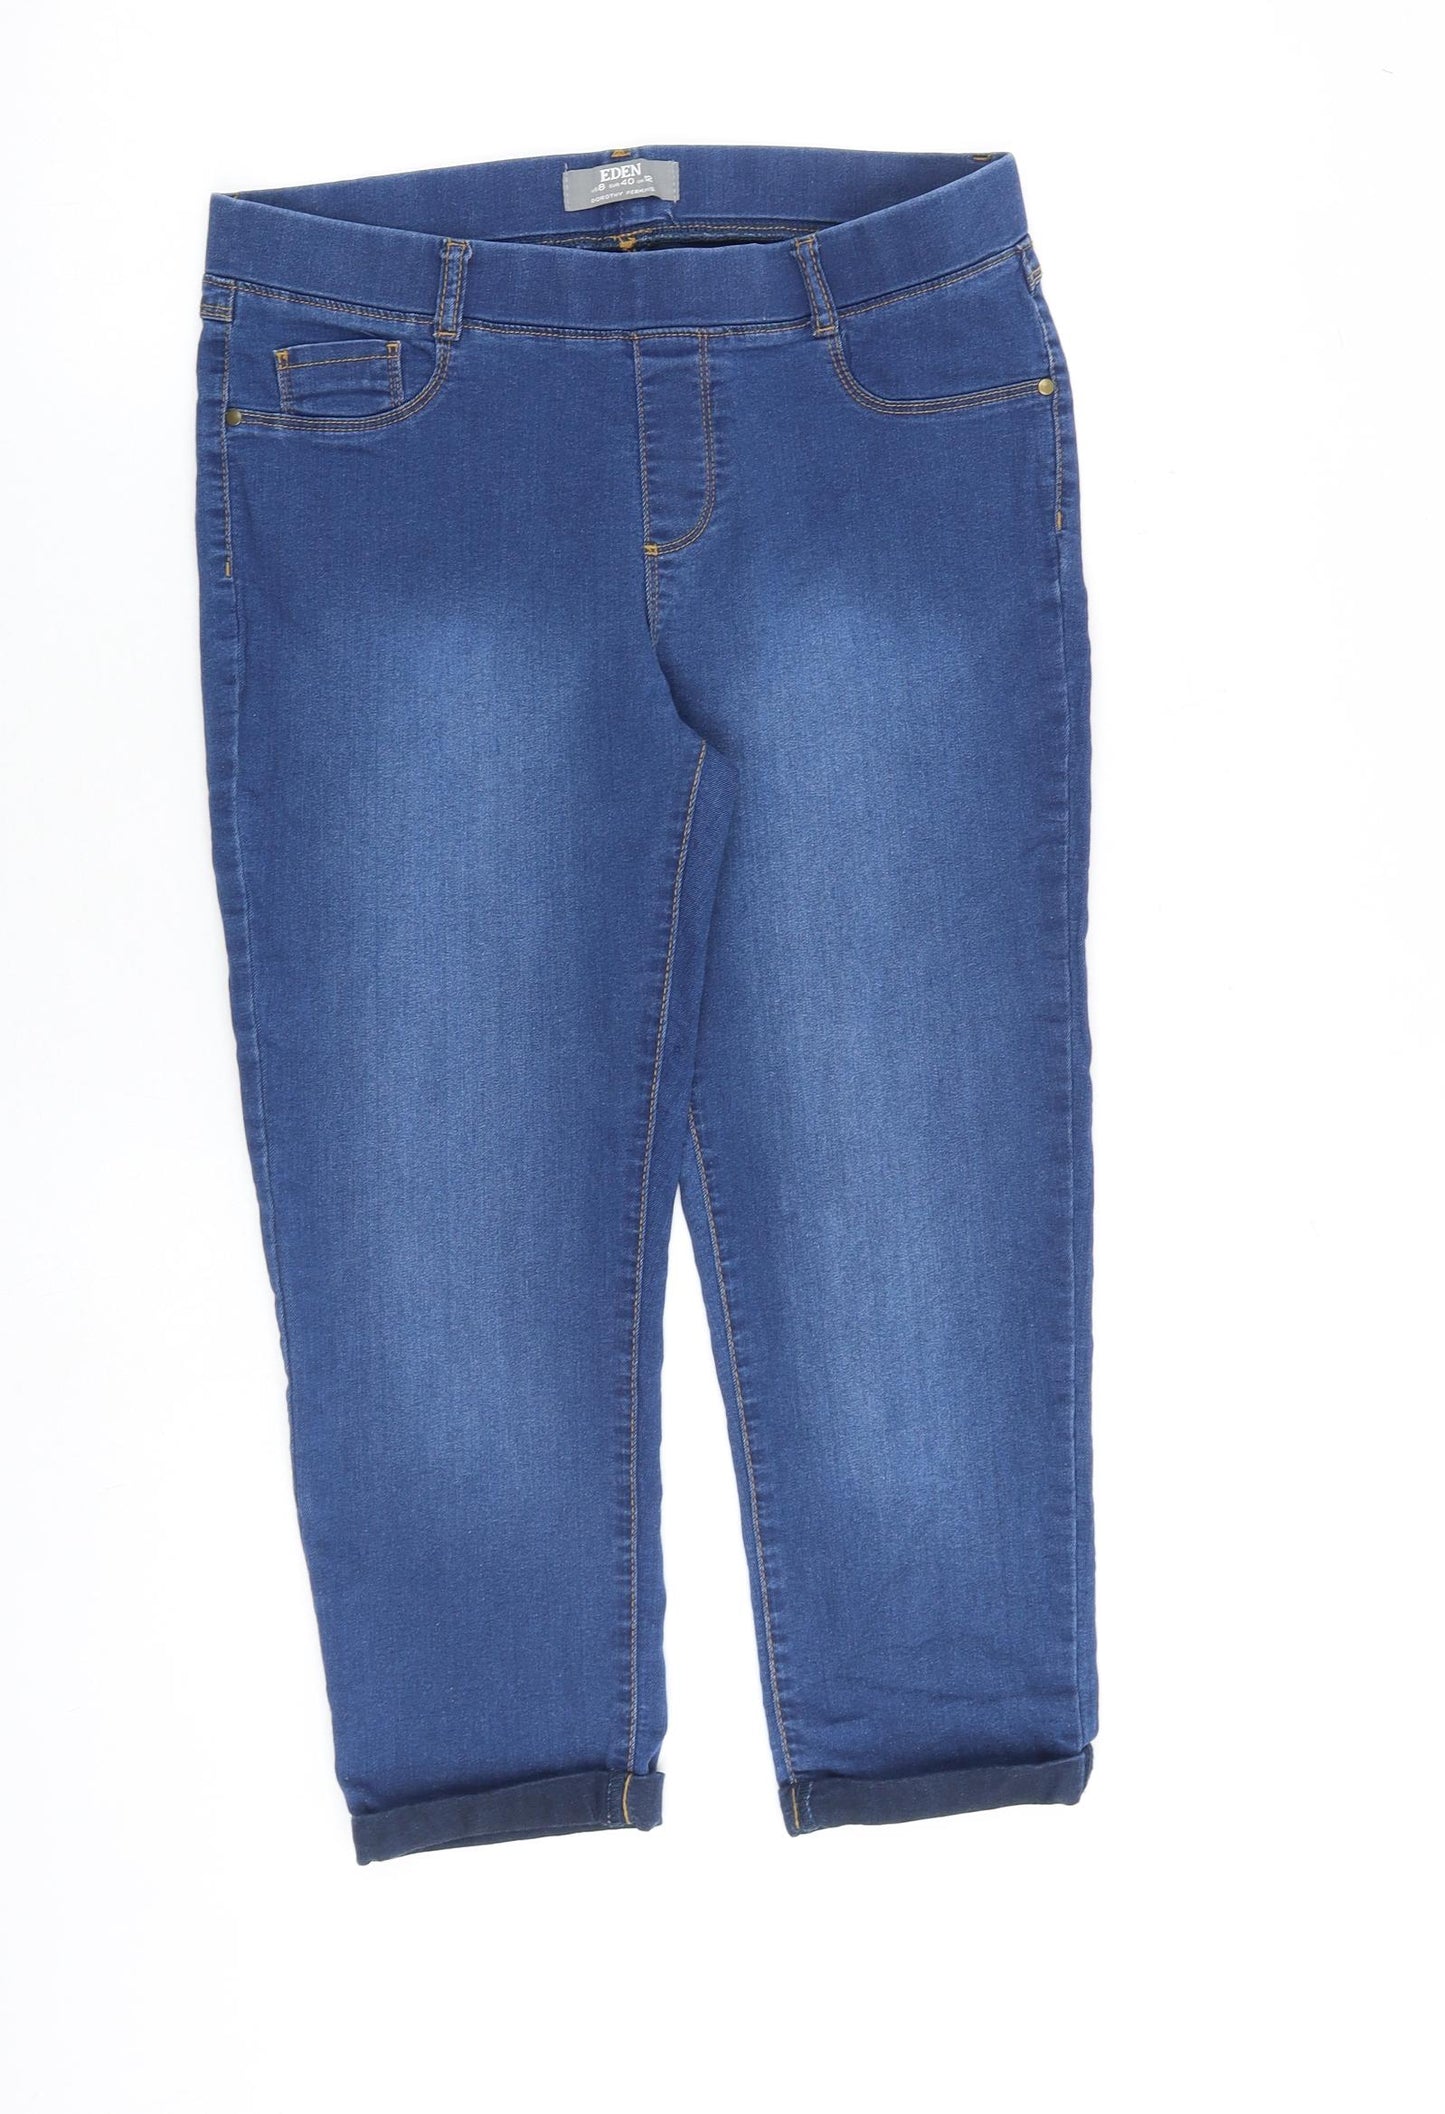 Dorothy Perkins Womens Blue Cotton Jegging Jeans Size 12 L22 in Regular